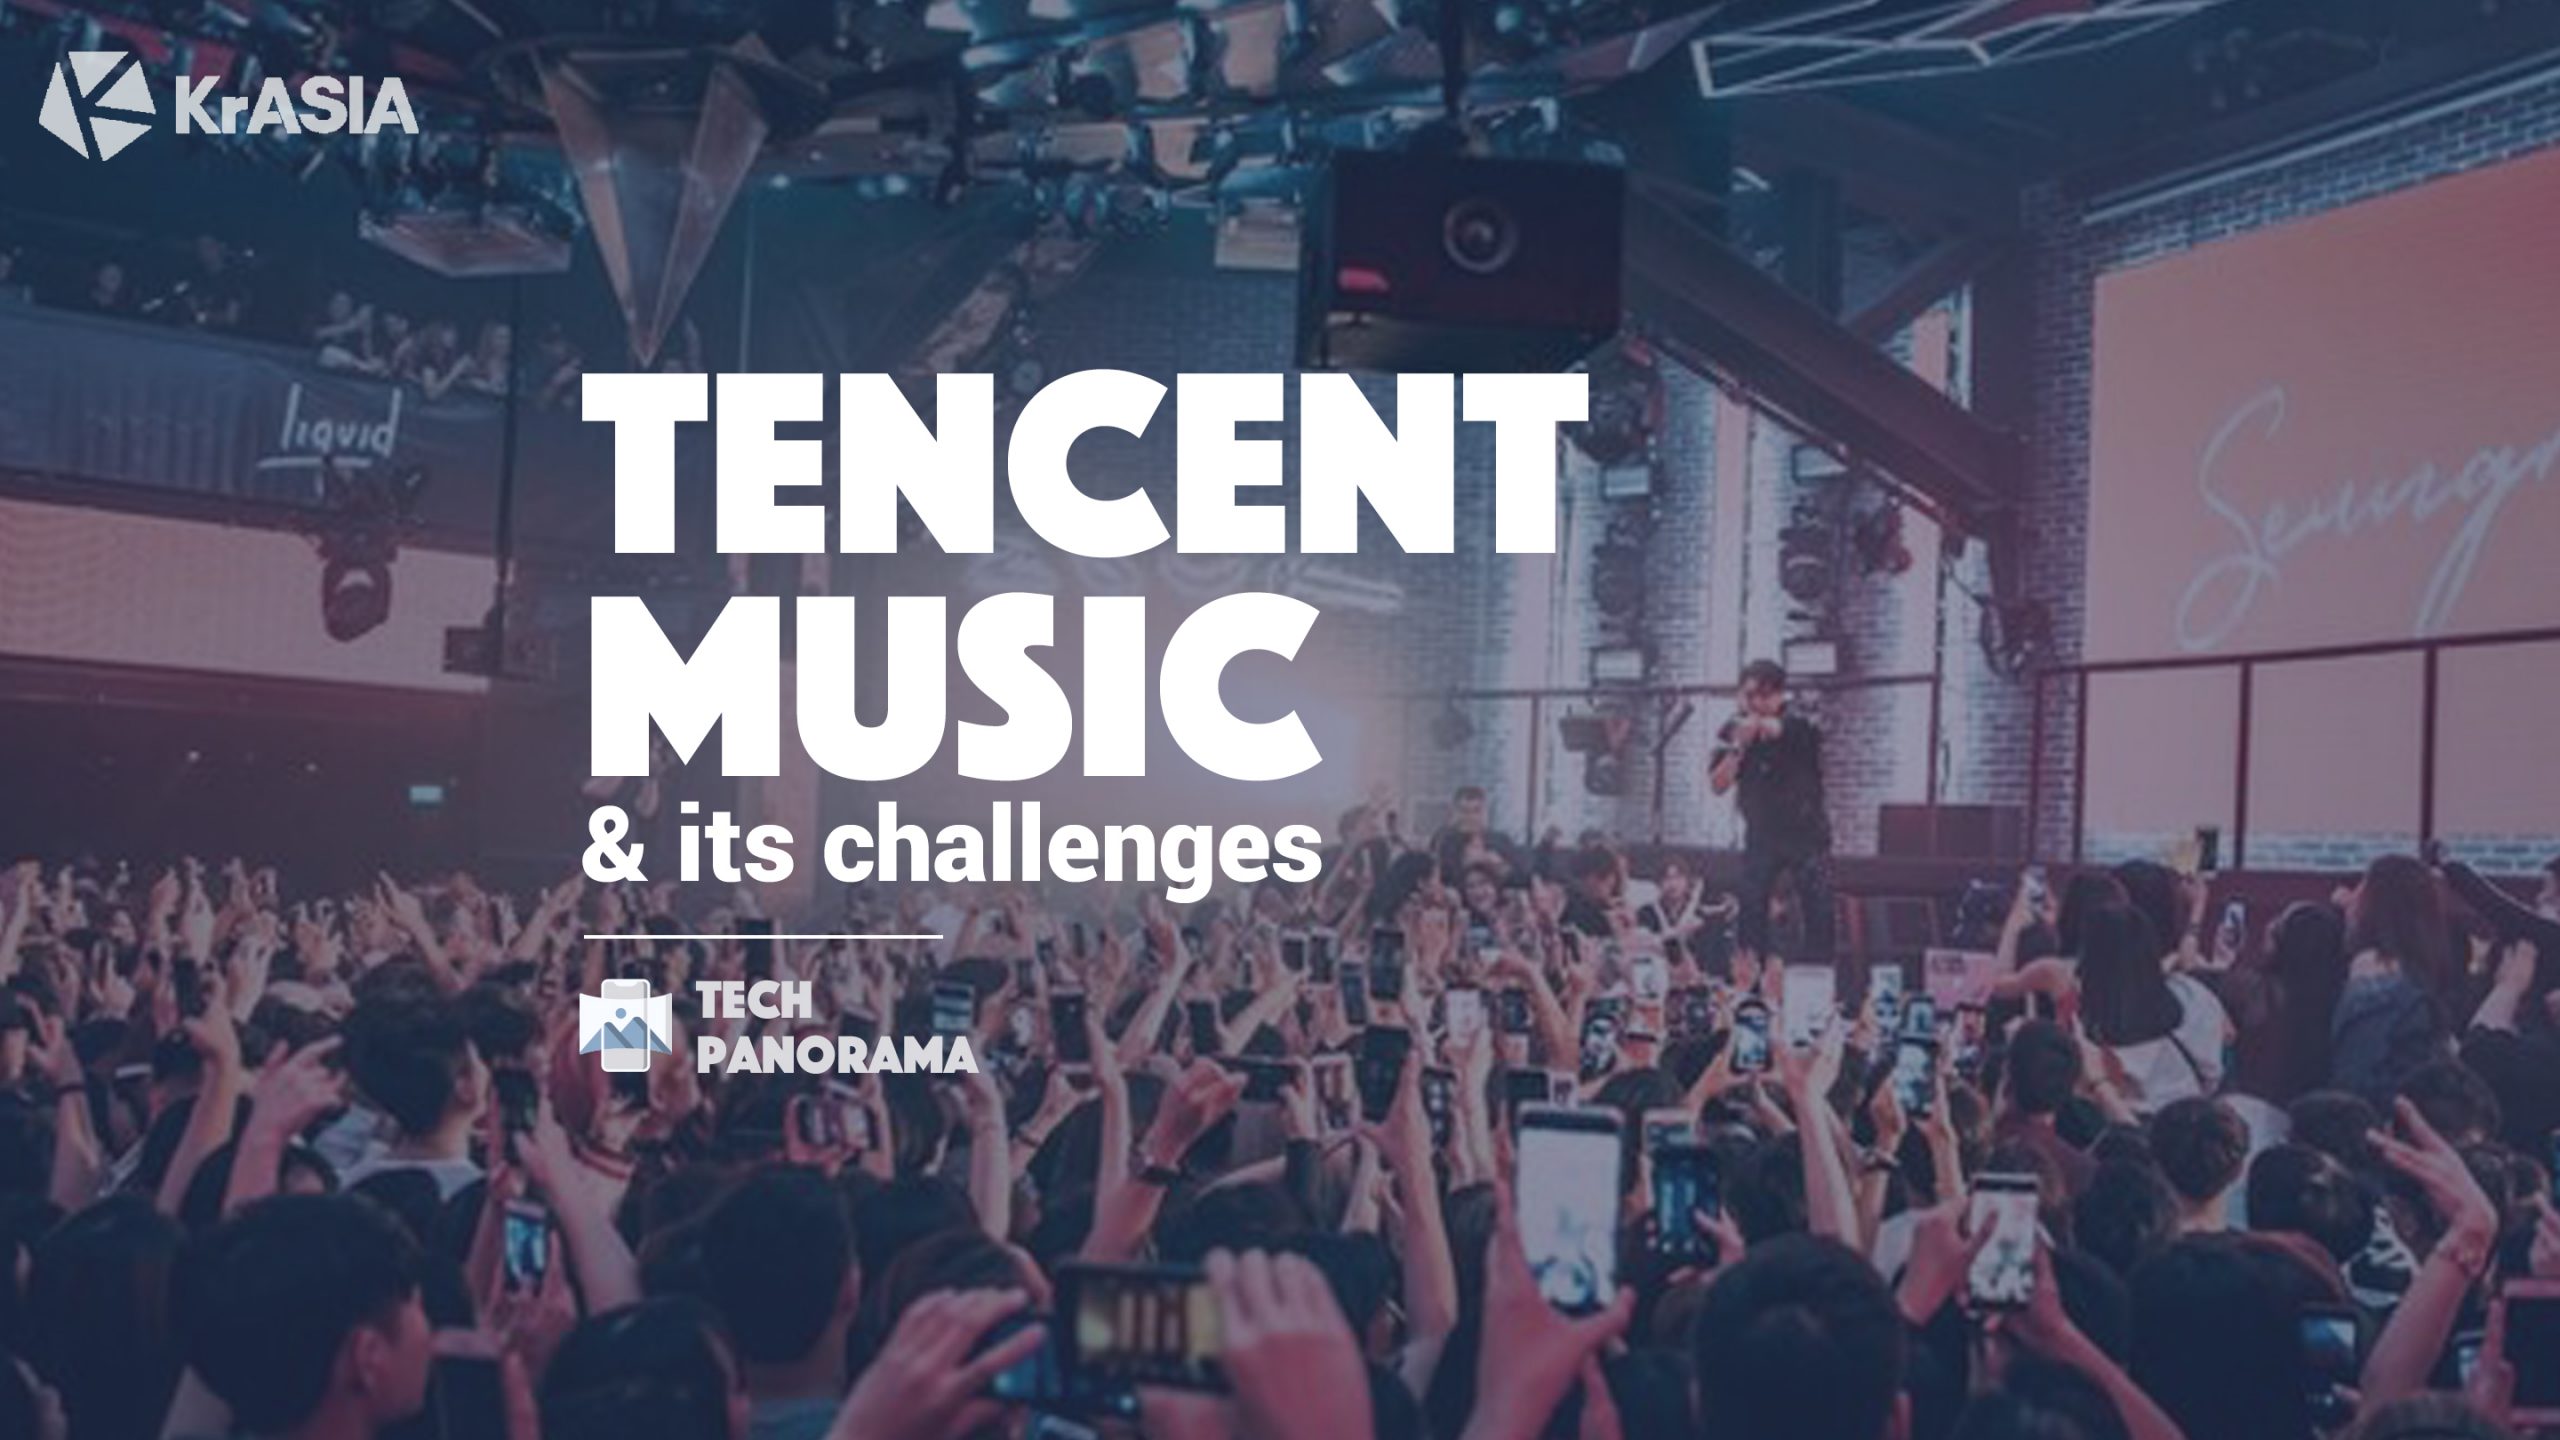 TECH PANORAMA | The unique business model of China’s largest music streaming platform